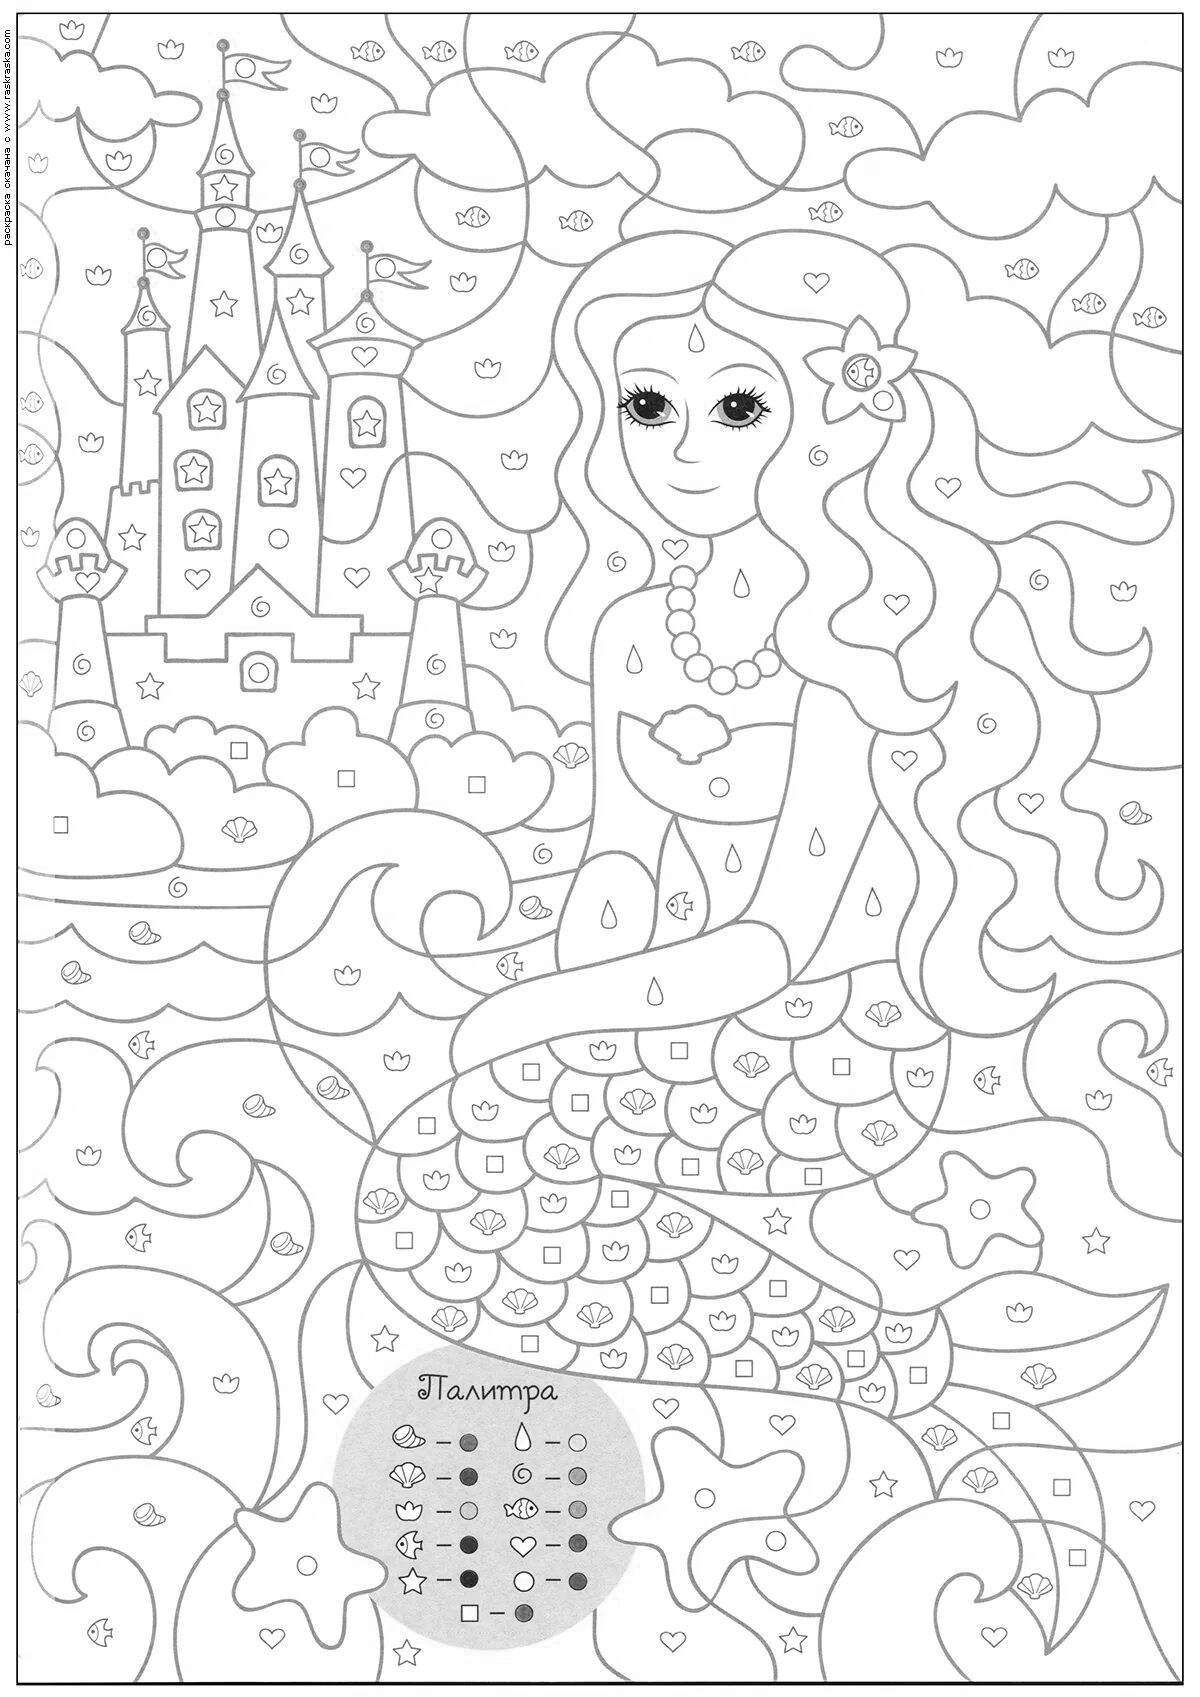 Bright coloring book by numbers